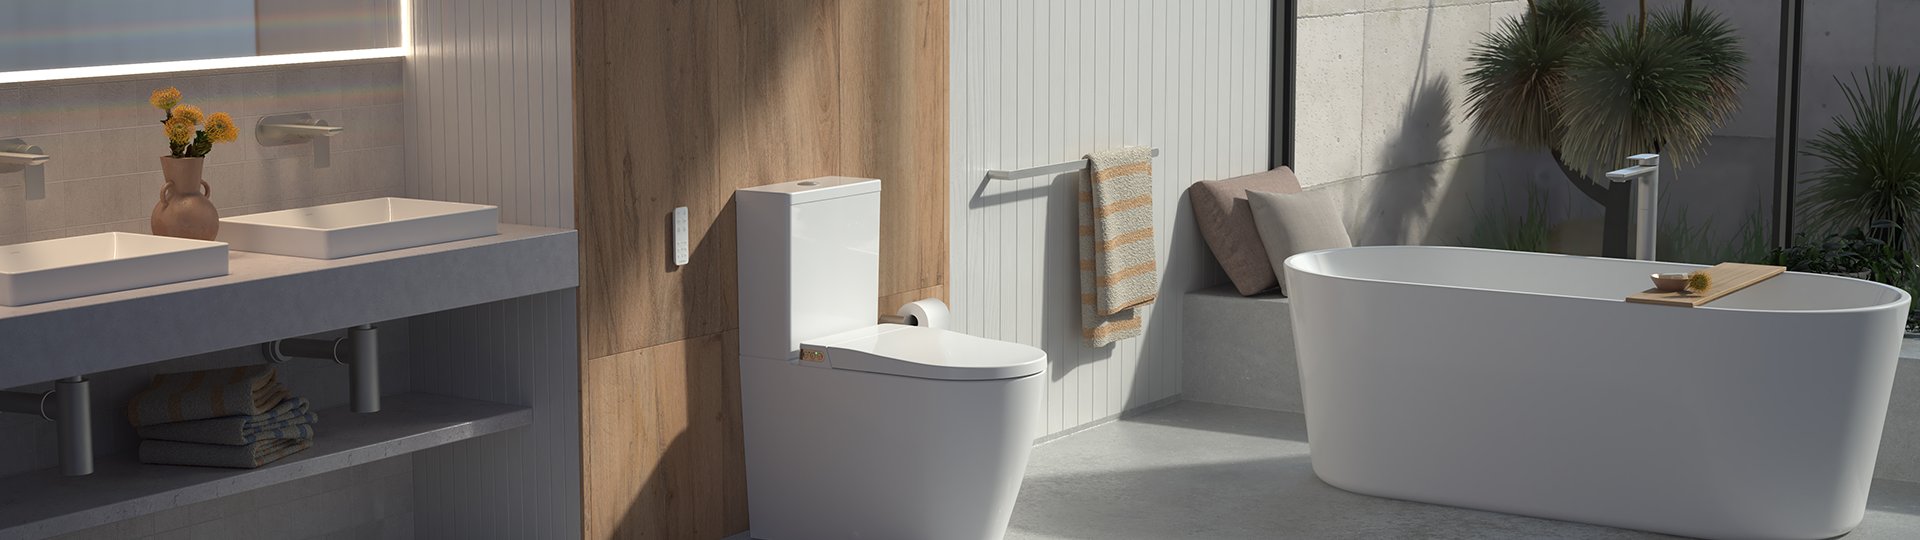 White bathroom with wood accents, inset basins, toilet and free standing bath